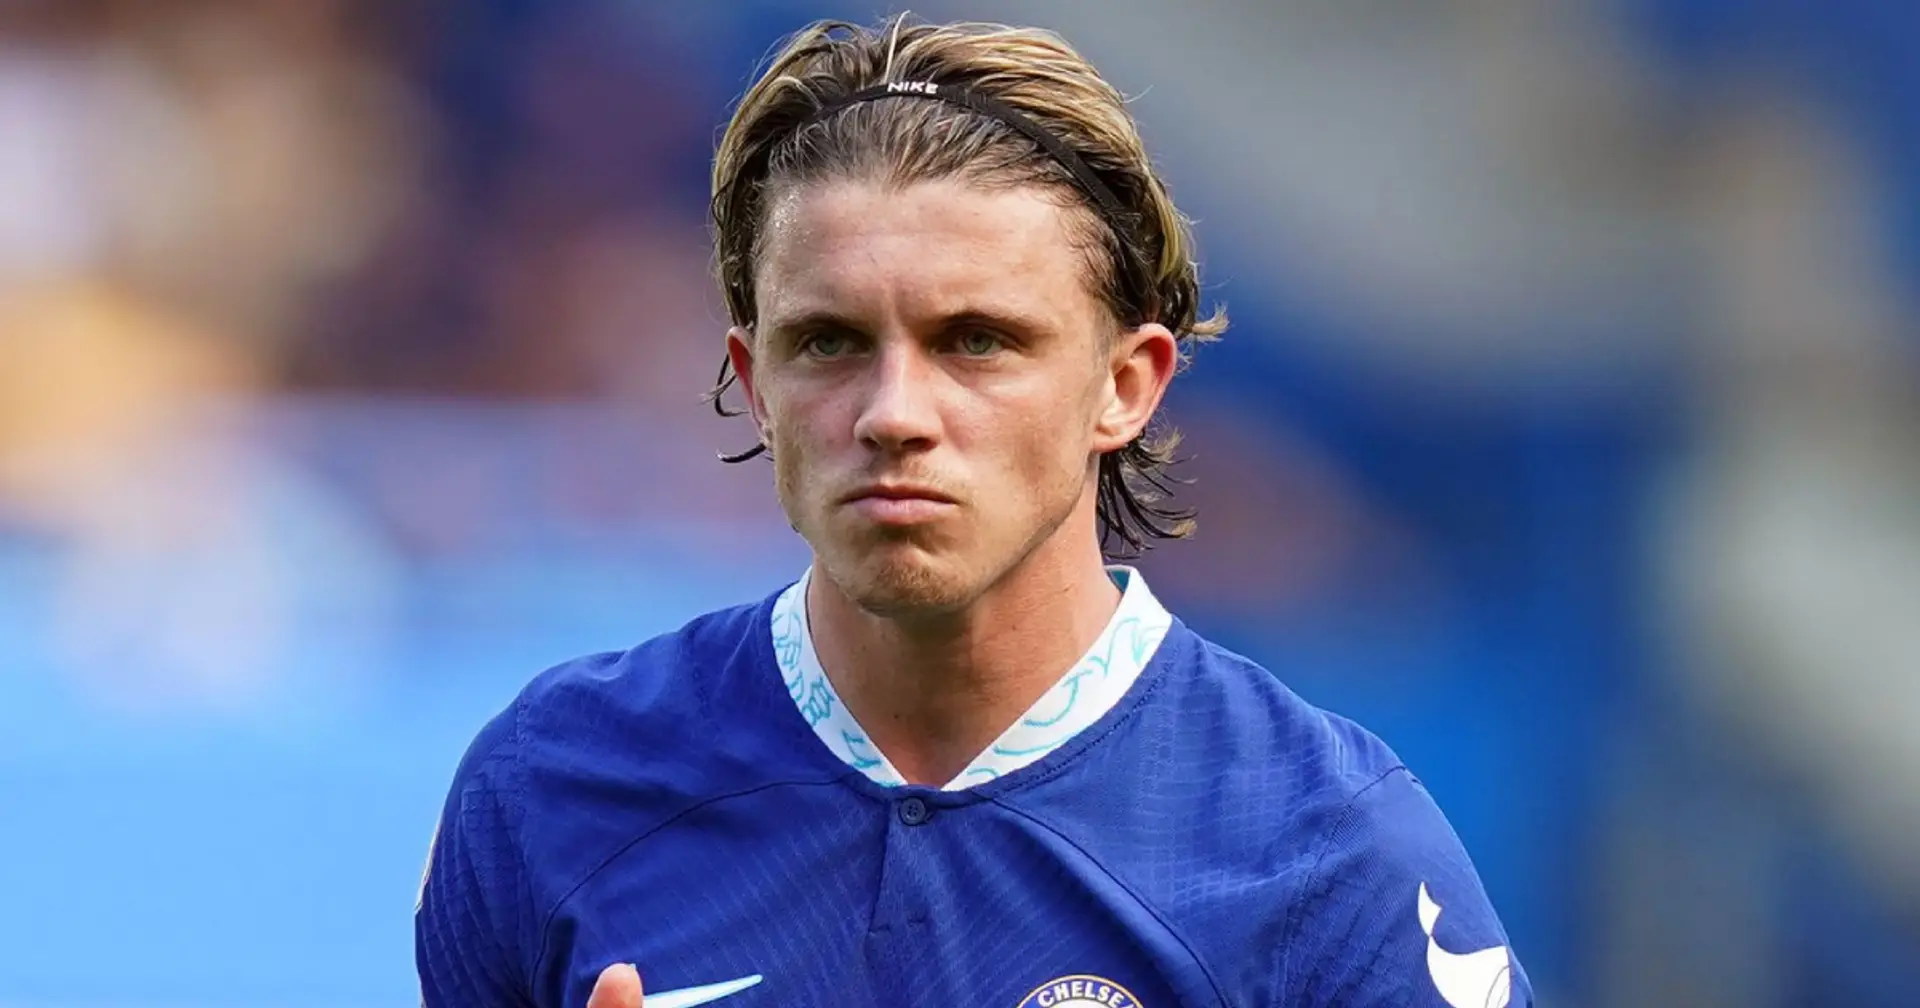 Chelsea rival targets Gallagher in January with Blues ready to 'listen to bids'